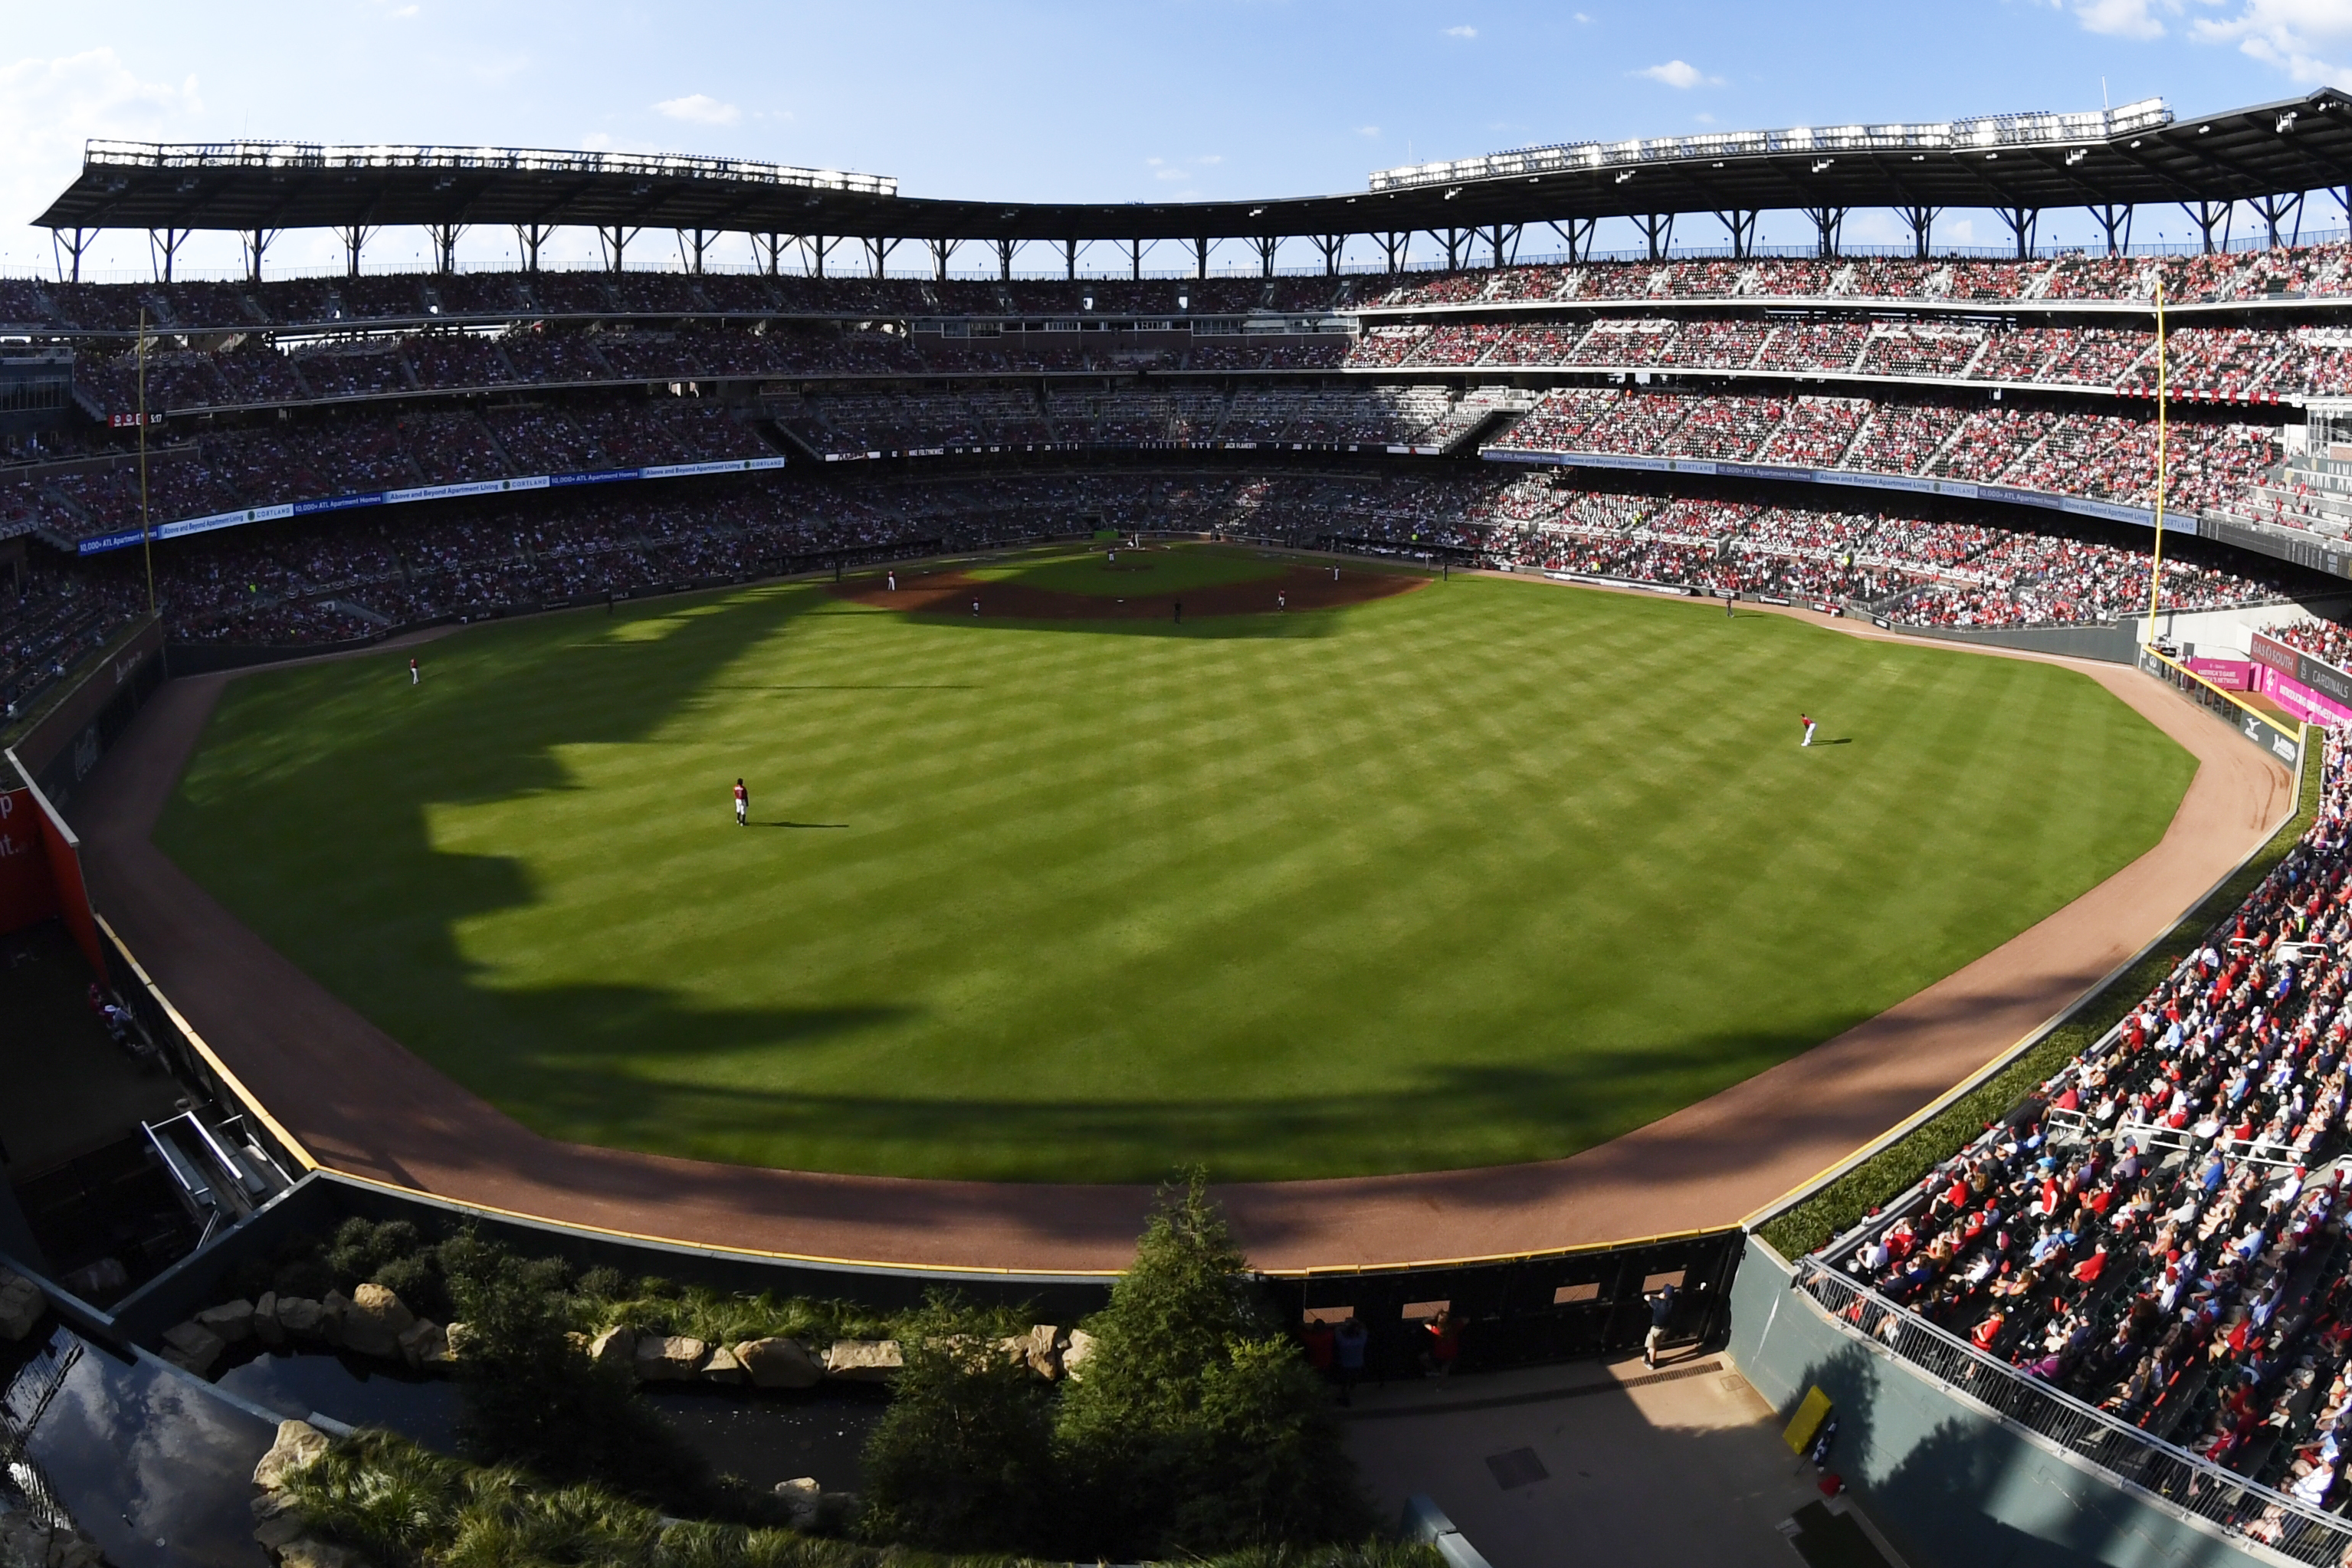 Braves, Native Americans To Discuss Future Of Tomahawk Chop